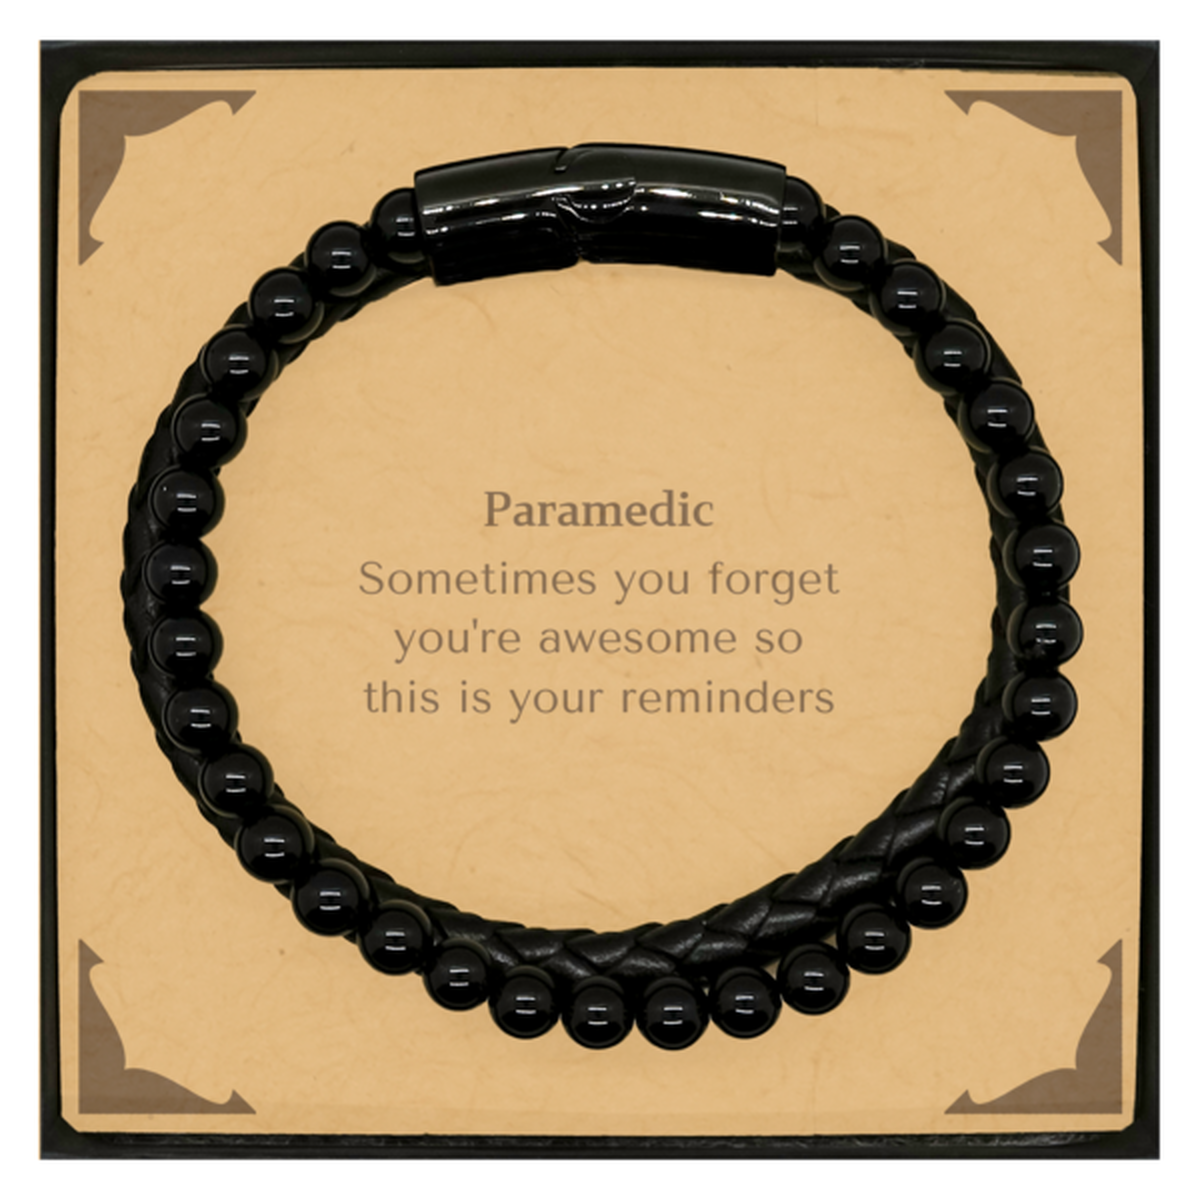 Sentimental Paramedic Stone Leather Bracelets, Paramedic Sometimes you forget you're awesome so this is your reminders, Graduation Christmas Birthday Gifts for Paramedic, Men, Women, Coworkers